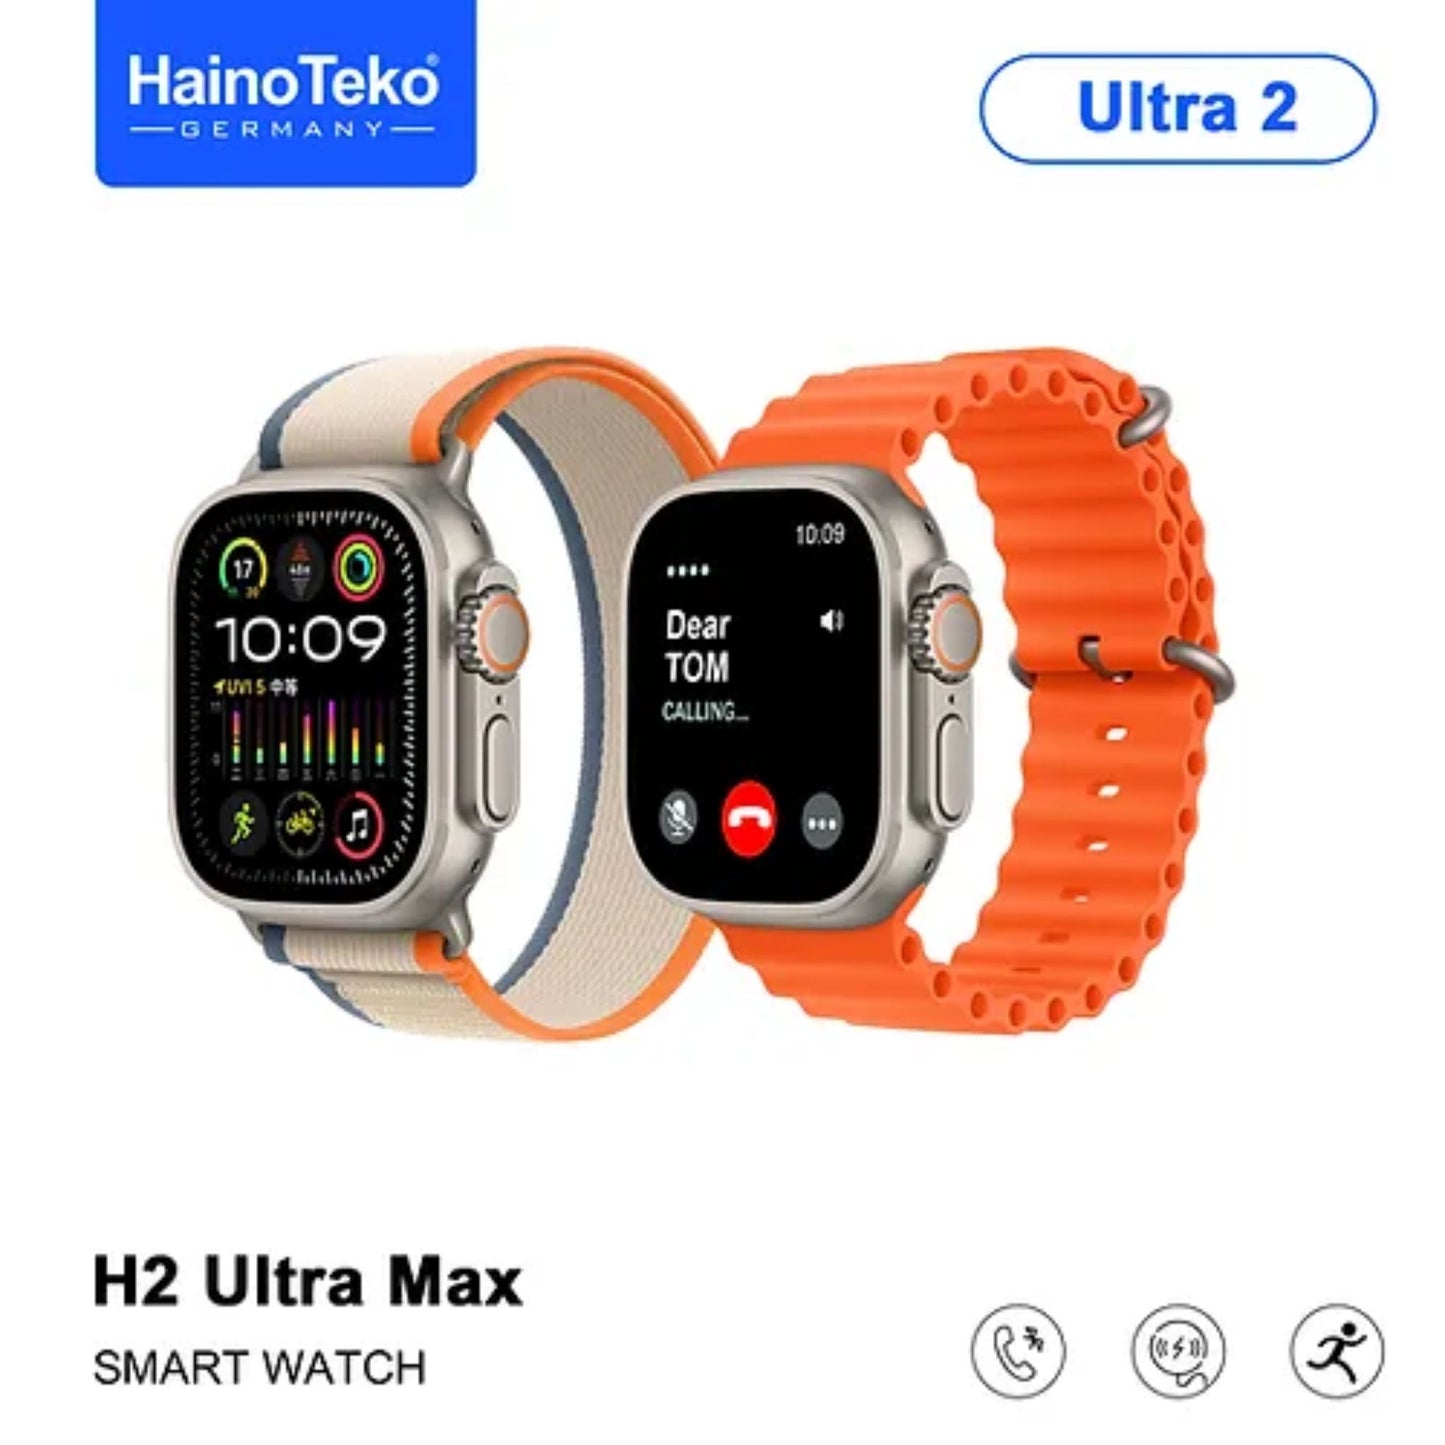 Haino Teko ultra max smart watch with full screen AMOLED display 2 pair straps and wireless charger for men's and boys